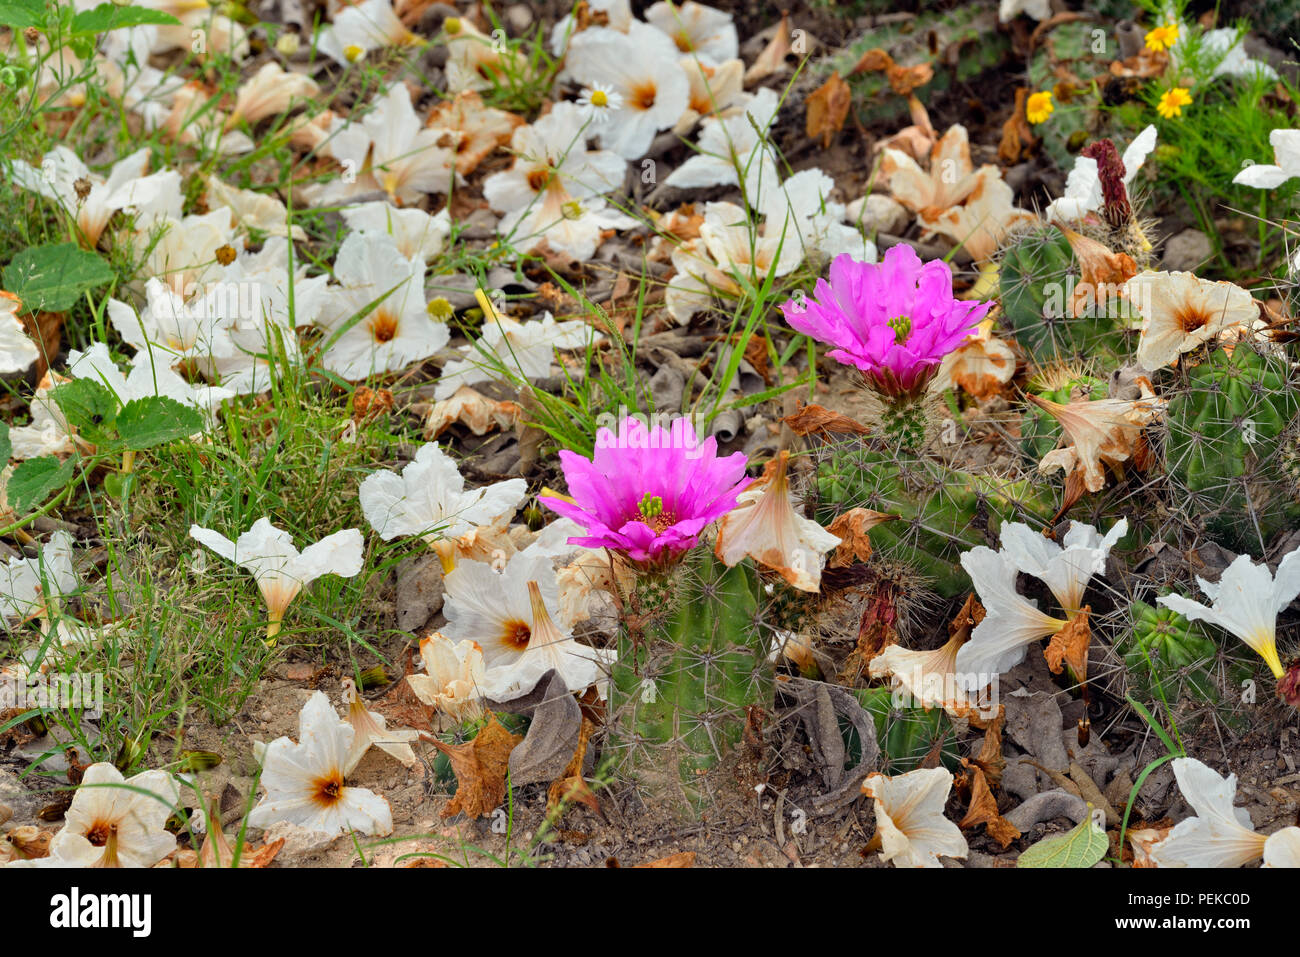 Strawberry Cactus (Mammillaria dioica) and fallen Mexican (wild) olive flowers in a residential garden, Rio Grande City, Texas, USA Stock Photo